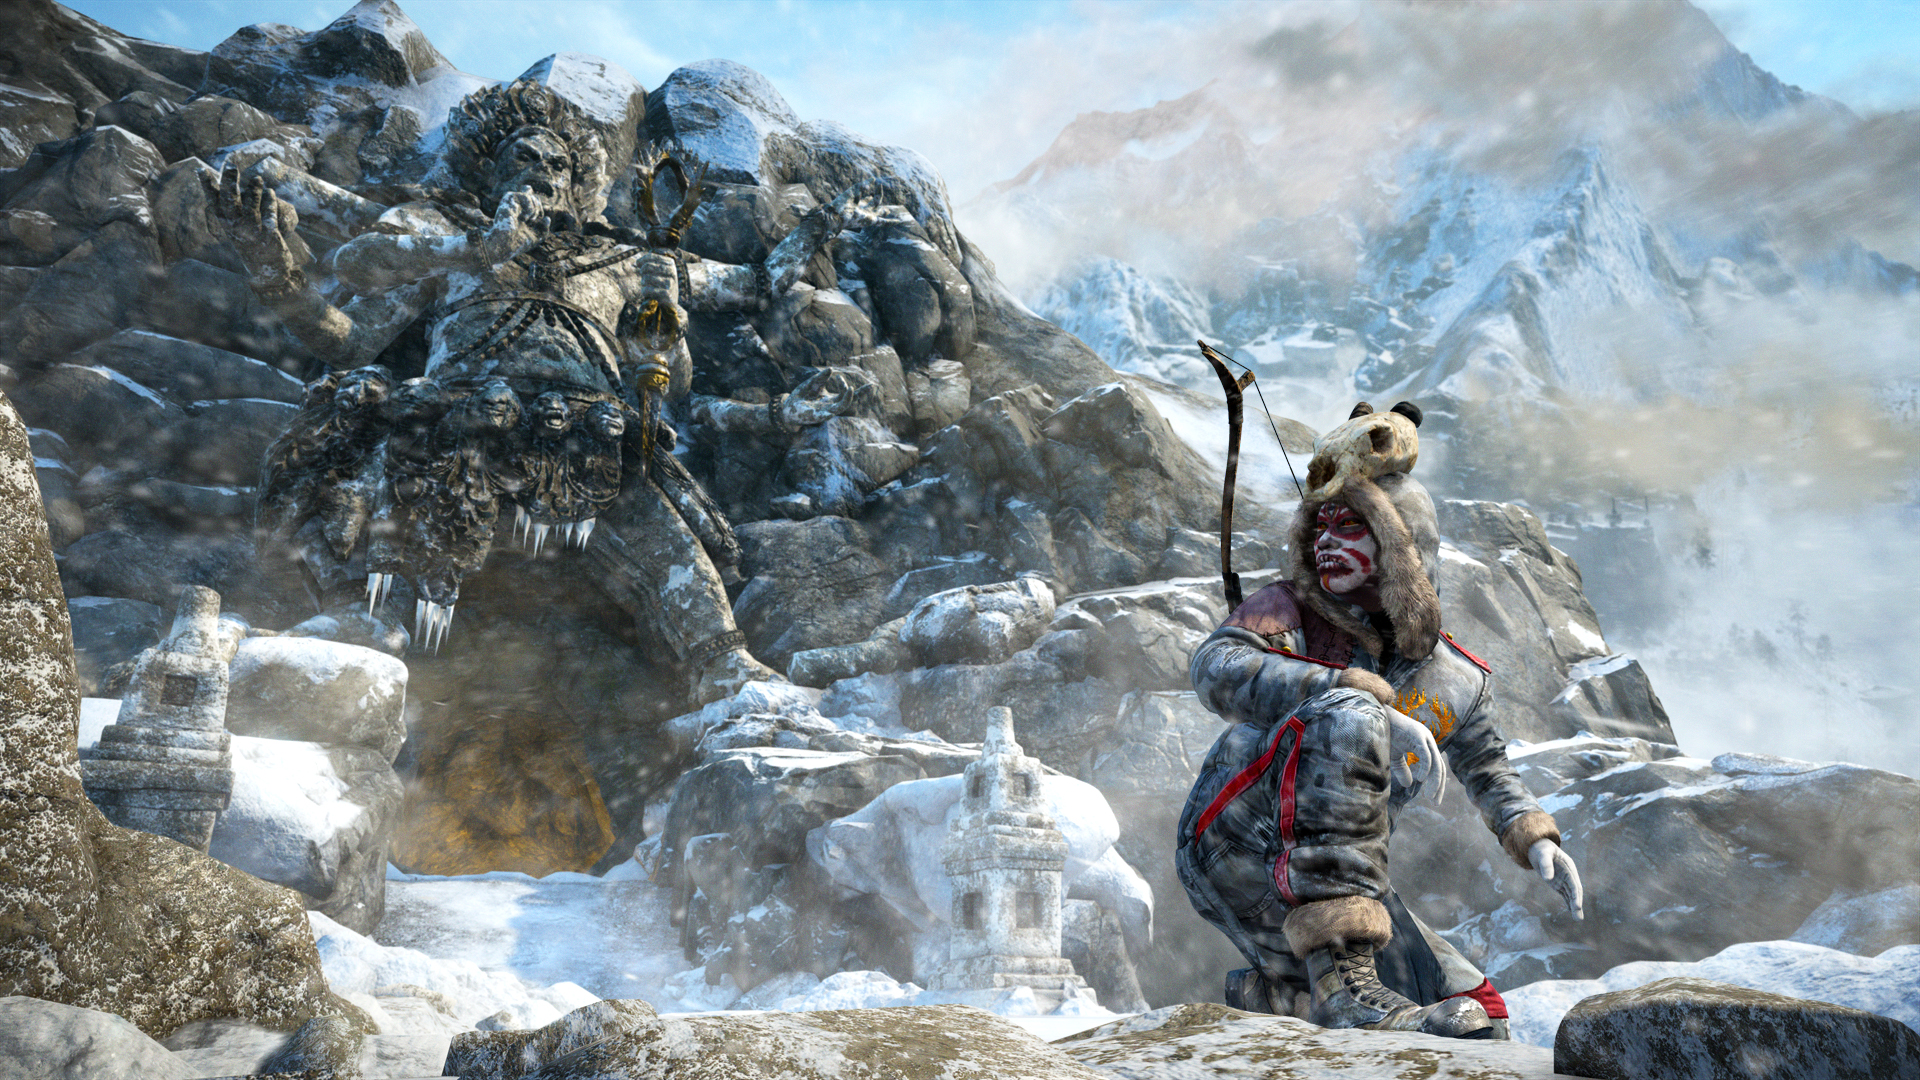 Media asset in full size related to 3dfxzone.it news item entitled as follows: Trailer e screenshots del DLC Valley of the Yetis di Far Cry 4 | Image Name: news22266_Far-Cry-4-Valley-of-the-Yetis-screenshot_2.jpg